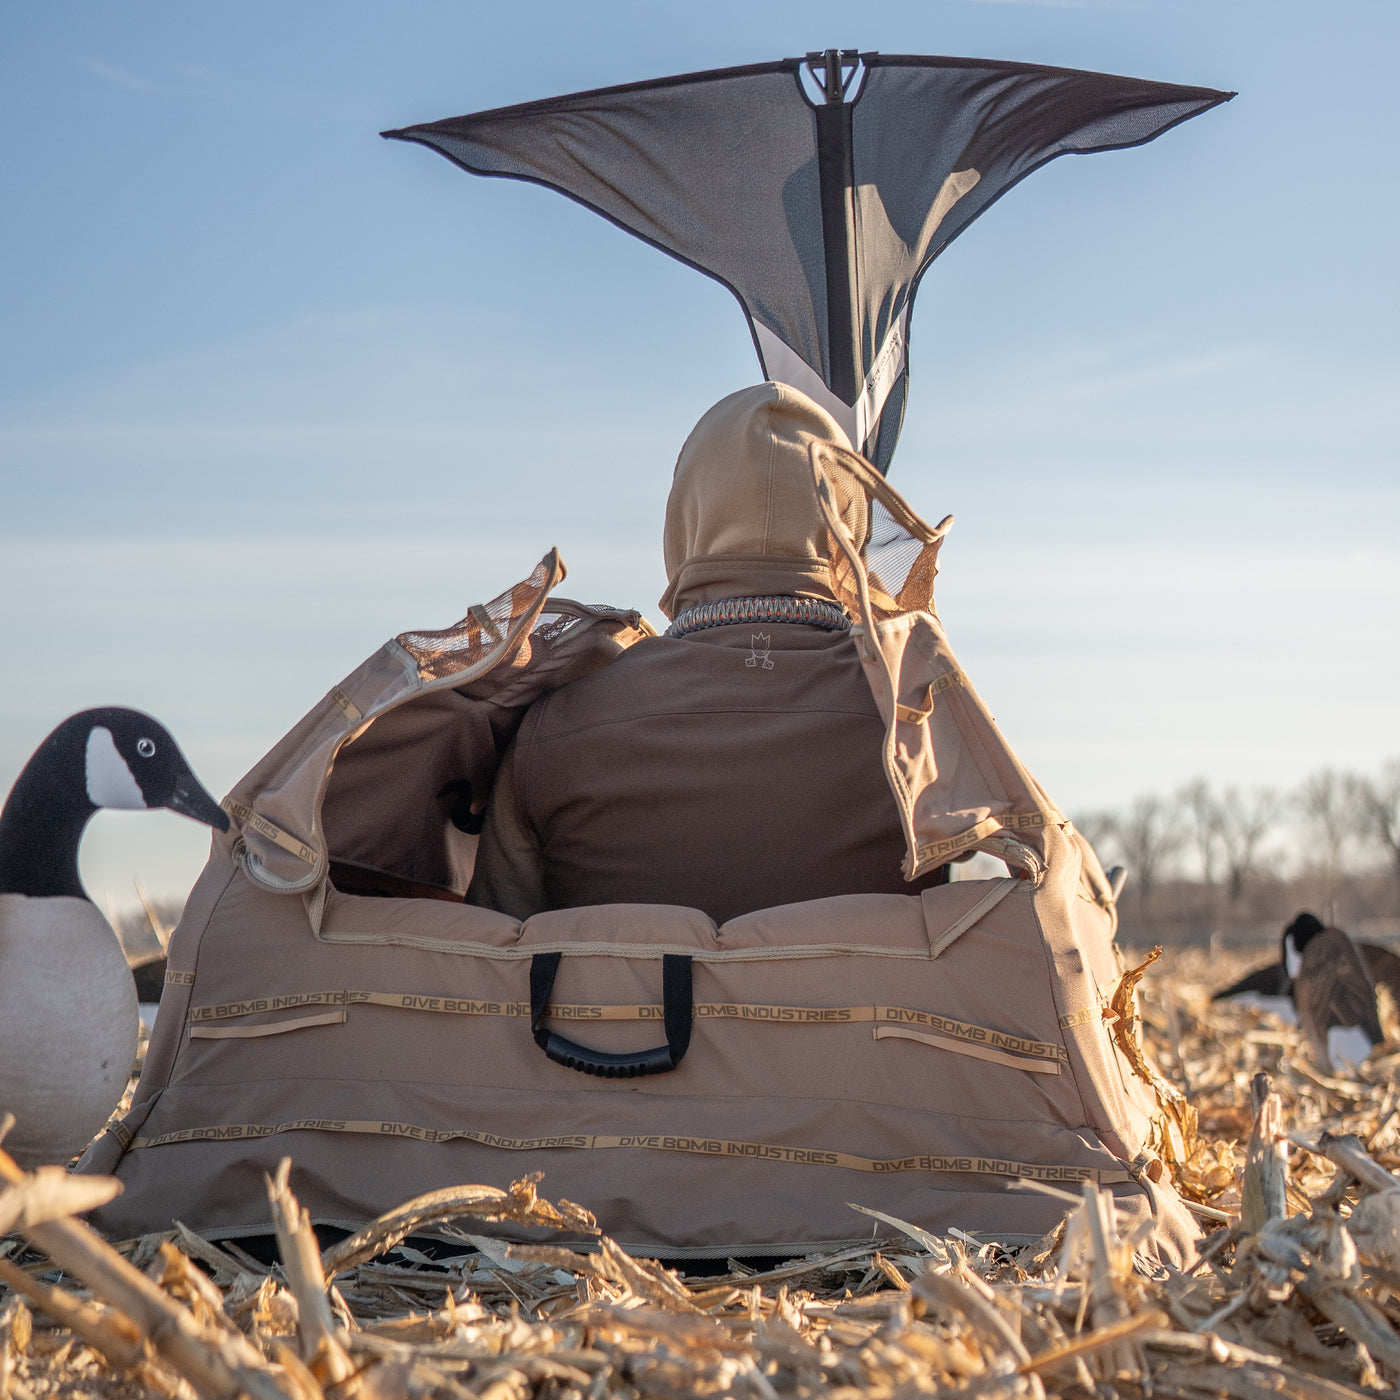 lowPRO Layout Blind *COMING THIS FALL!